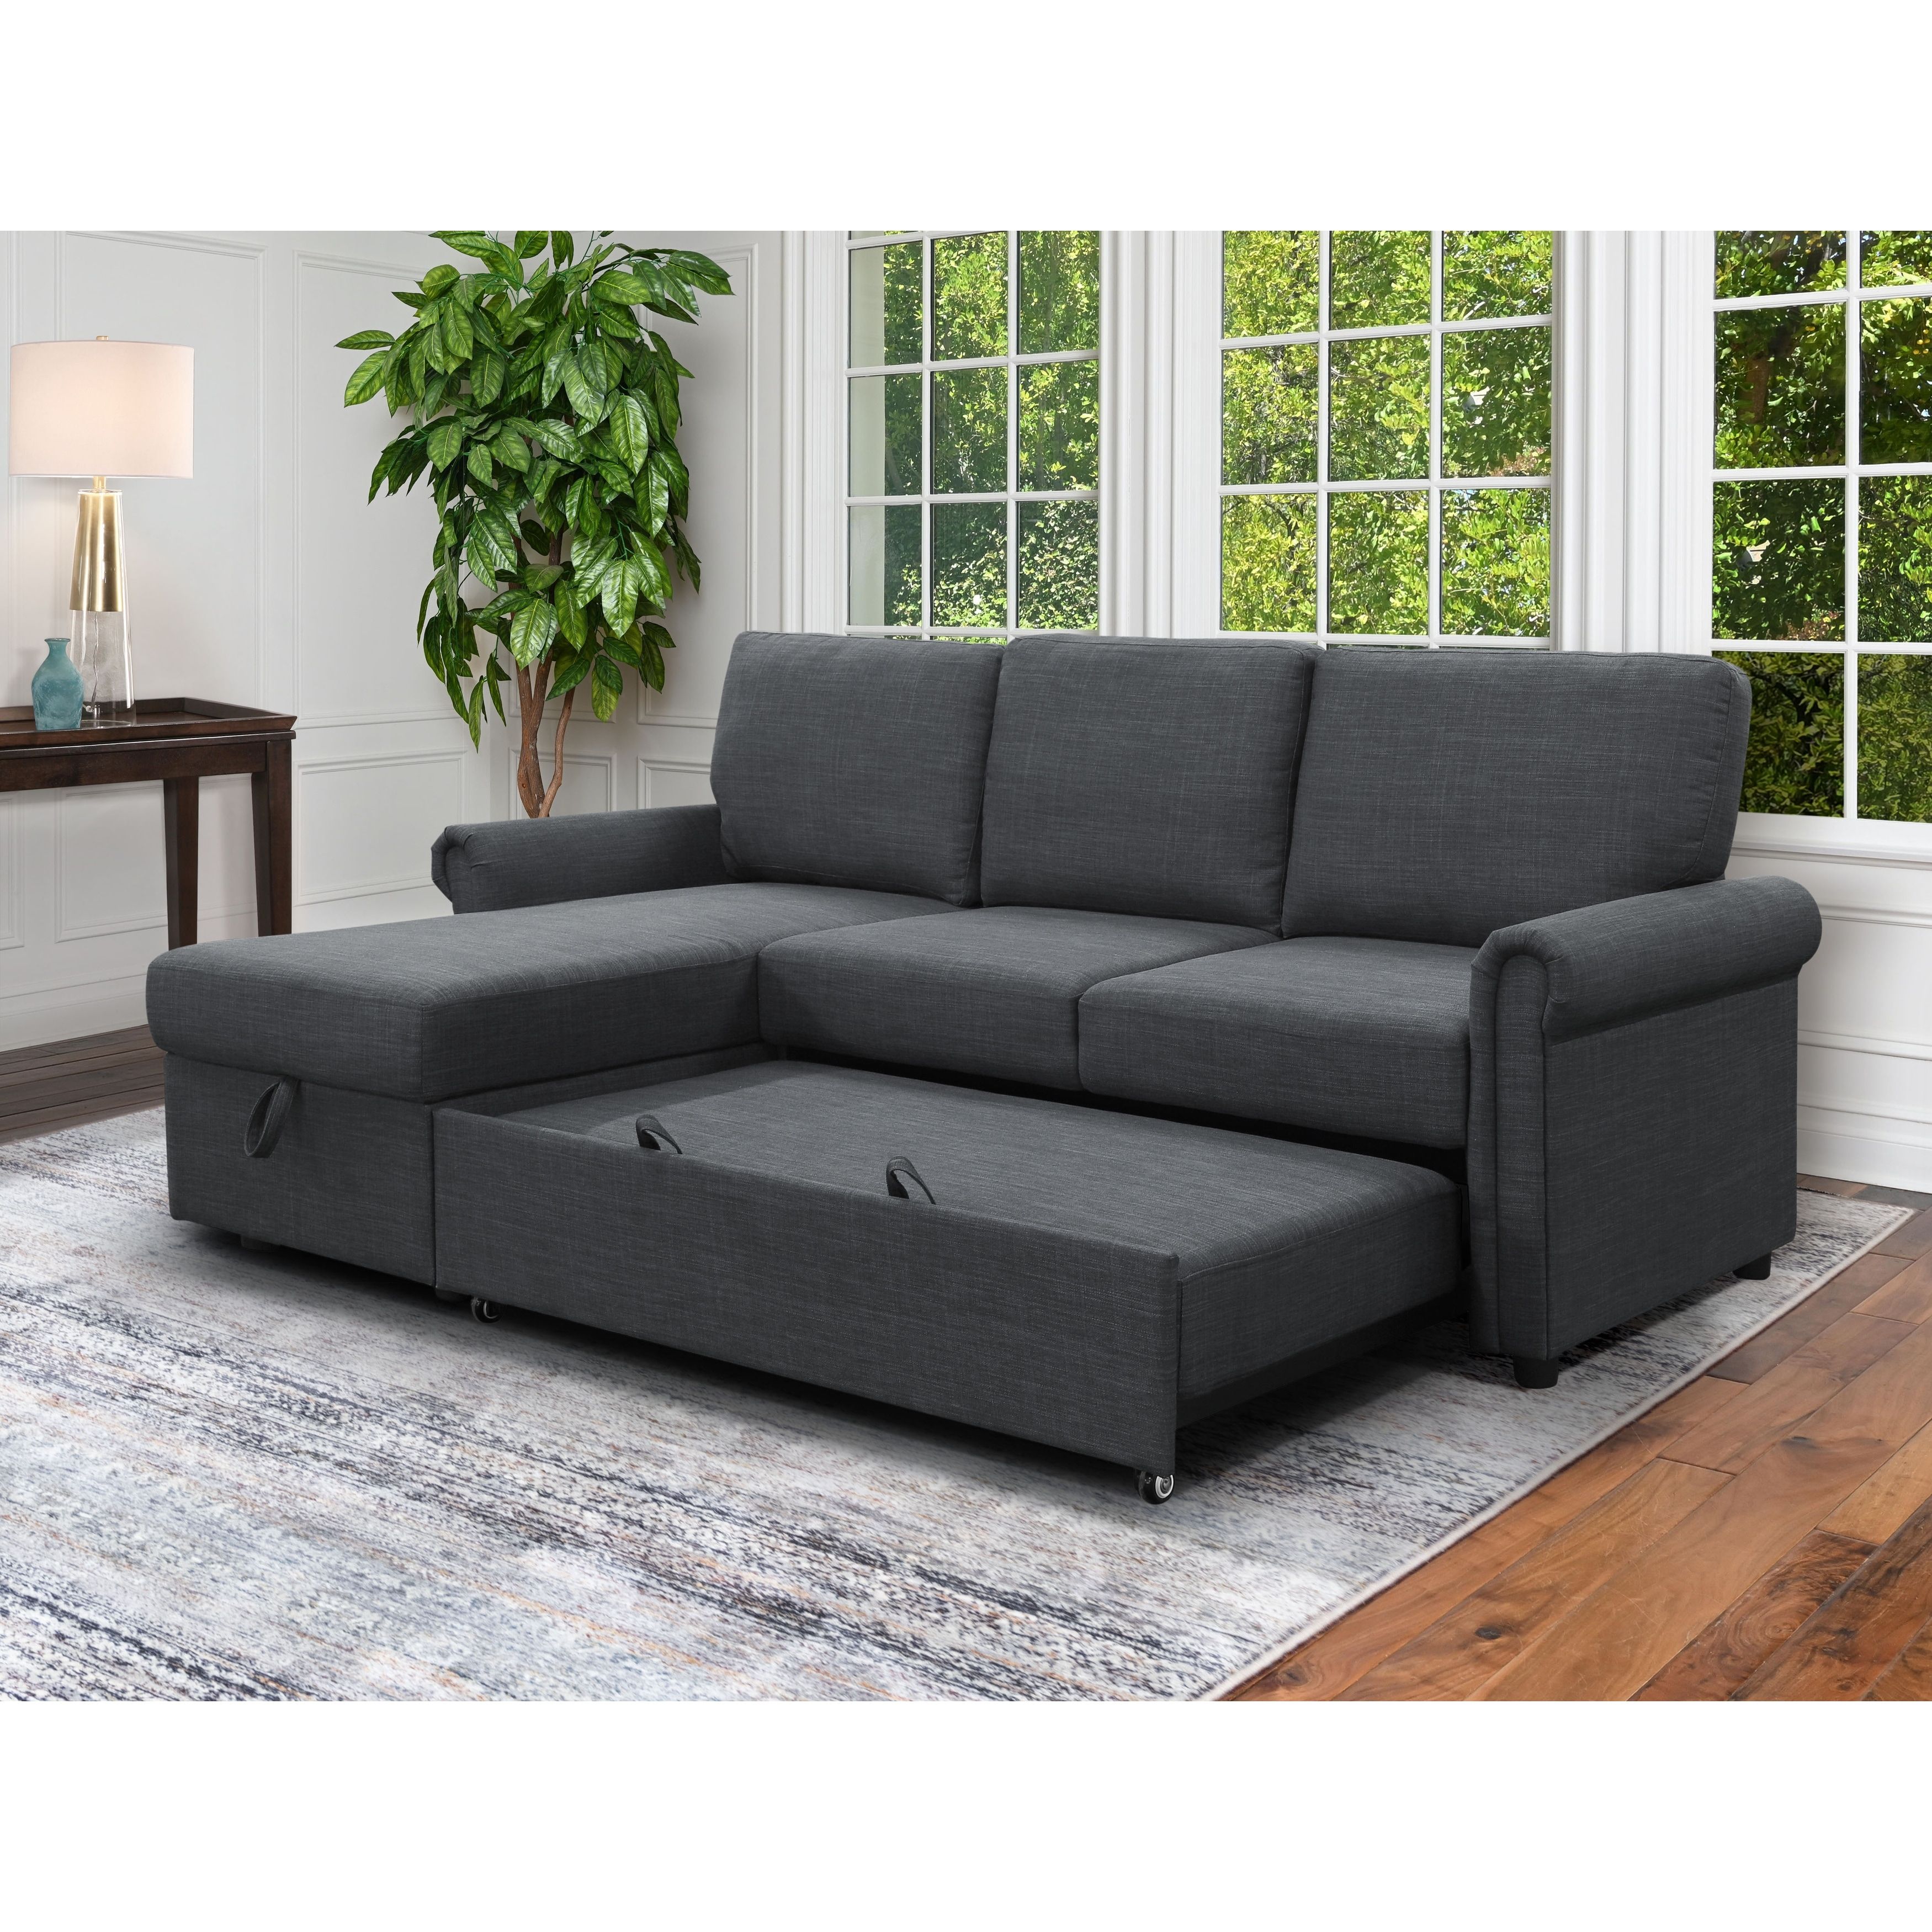 Abbyson Hamilton Reversible Fabric Sleeper Sectional With Storage – –  31997945 Regarding Sofa Sectionals With Storage (View 7 of 15)